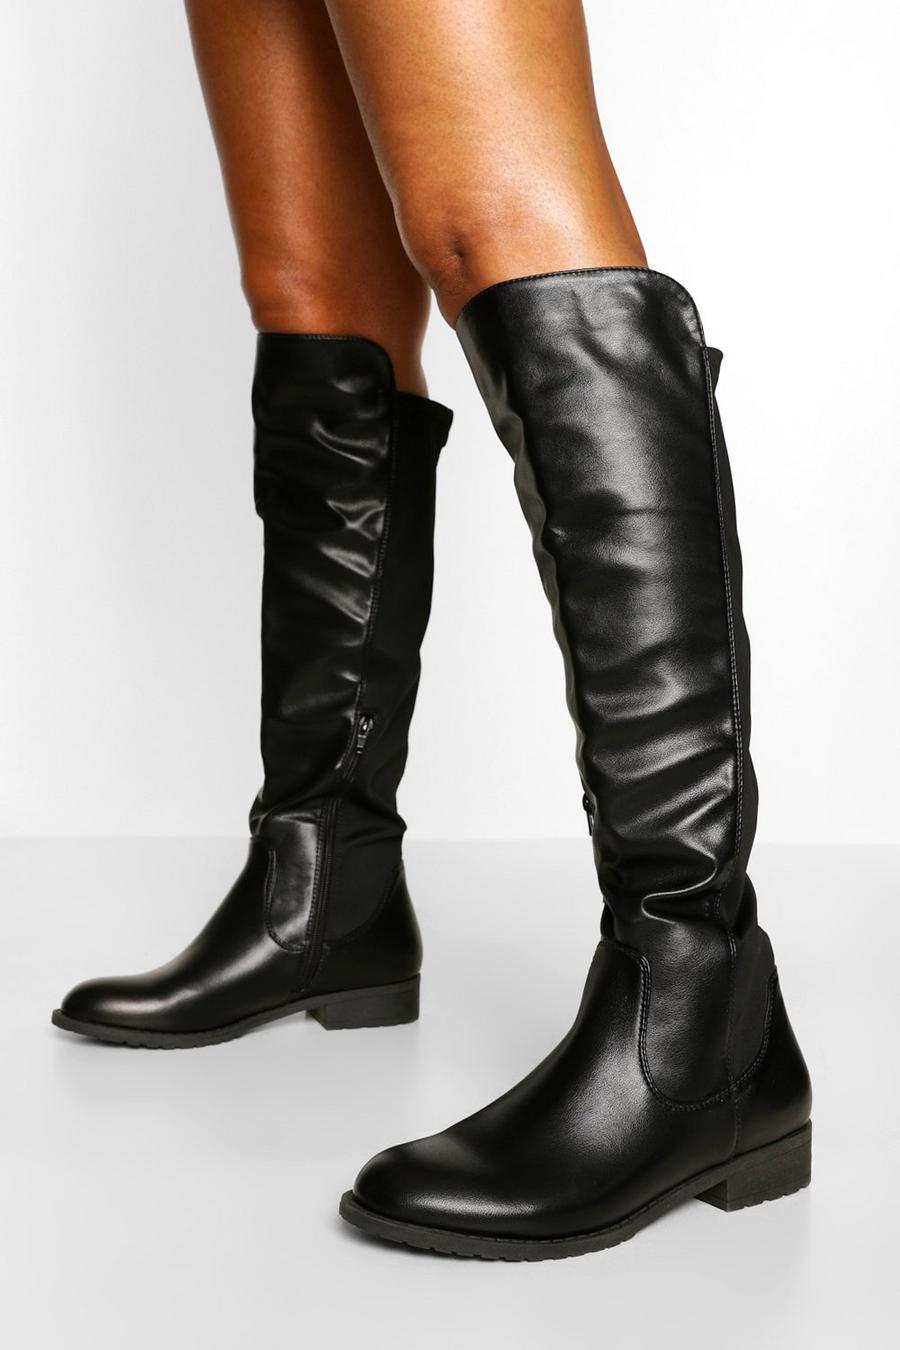 Long leather riding boots size 7 